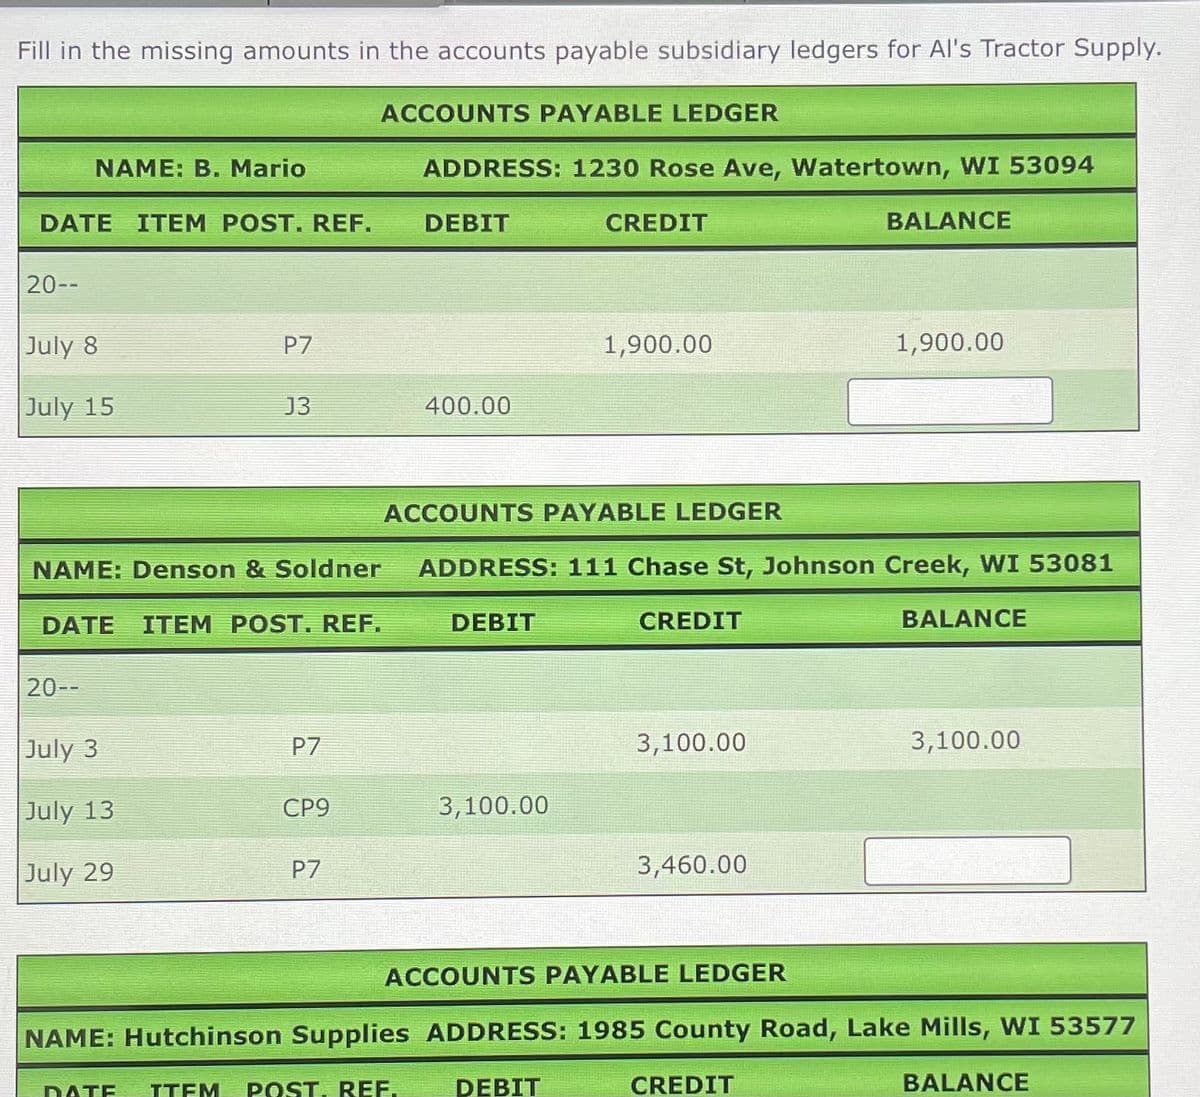 Fill in the missing amounts in the accounts payable subsidiary ledgers for Al's Tractor Supply.
NAME: B. Mario
ACCOUNTS PAYABLE LEDGER
ADDRESS: 1230 Rose Ave, Watertown, WI 53094
DATE ITEM POST. REF.
DEBIT
CREDIT
BALANCE
20--
July 8
P7
1,900.00
1,900.00
July 15
J3
400.00
NAME: Denson & Soldner
ACCOUNTS PAYABLE LEDGER
ADDRESS: 111 Chase St, Johnson Creek, WI 53081
DATE
ITEM POST. REF.
DEBIT
CREDIT
BALANCE
20--
July 3
P7
3,100.00
3,100.00
July 13
CP9
3,100.00
July 29
P7
3,460.00
ACCOUNTS PAYABLE LEDGER
NAME: Hutchinson Supplies ADDRESS: 1985 County Road, Lake Mills, WI 53577
DATE
TTEM POST. REF.
DEBIT
CREDIT
BALANCE